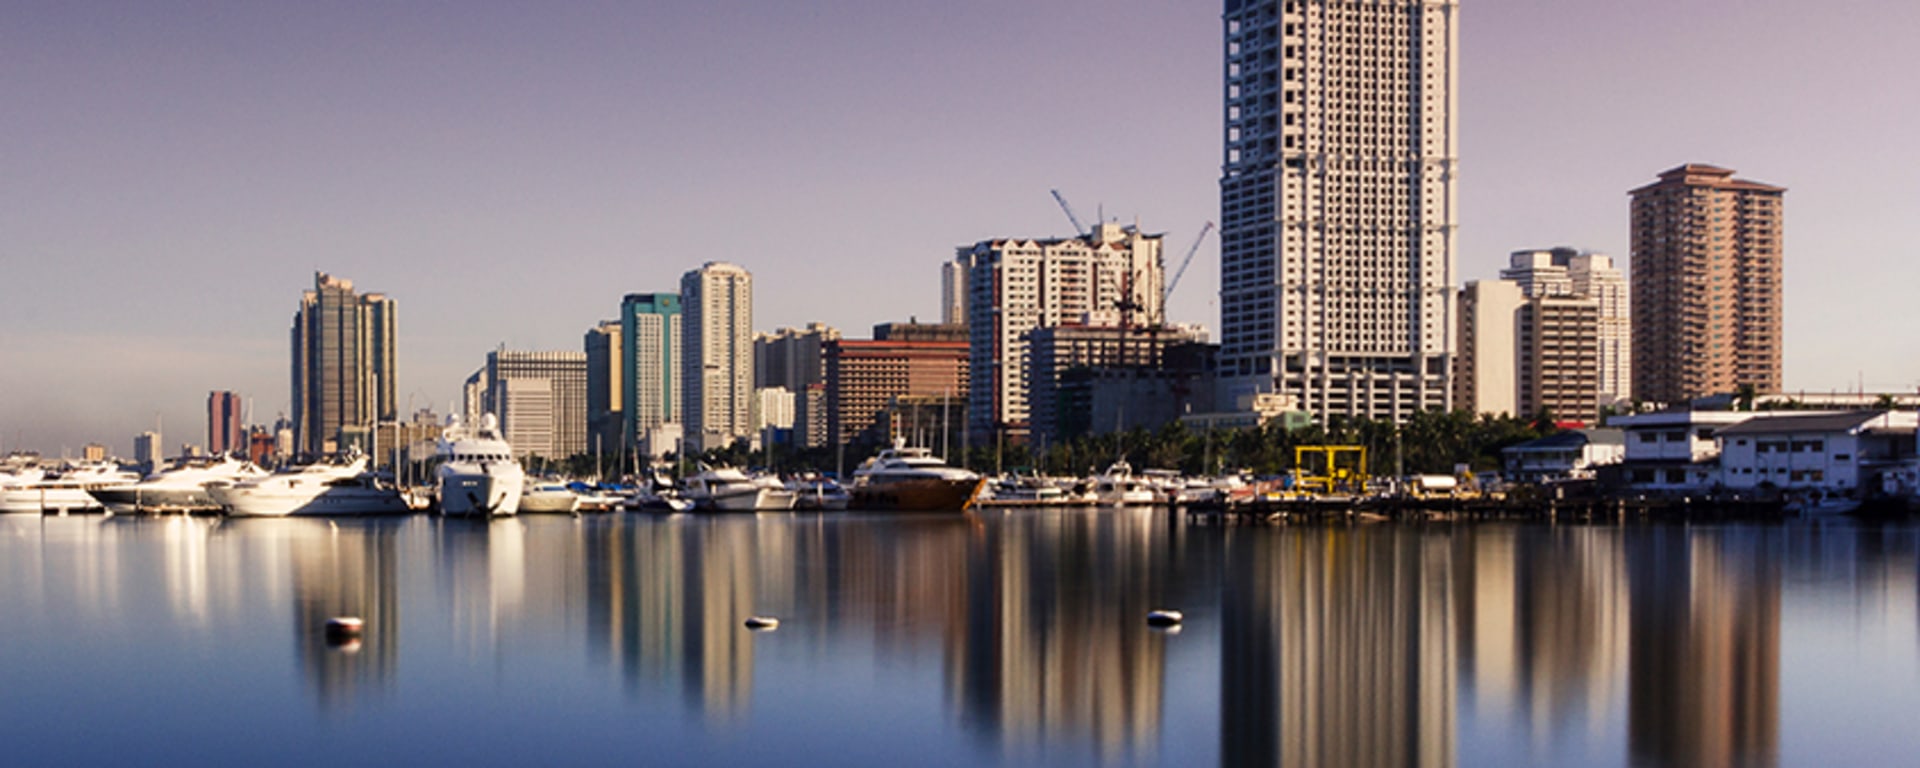 A photo of a city in the Philippines where the sea reflects the skyline.